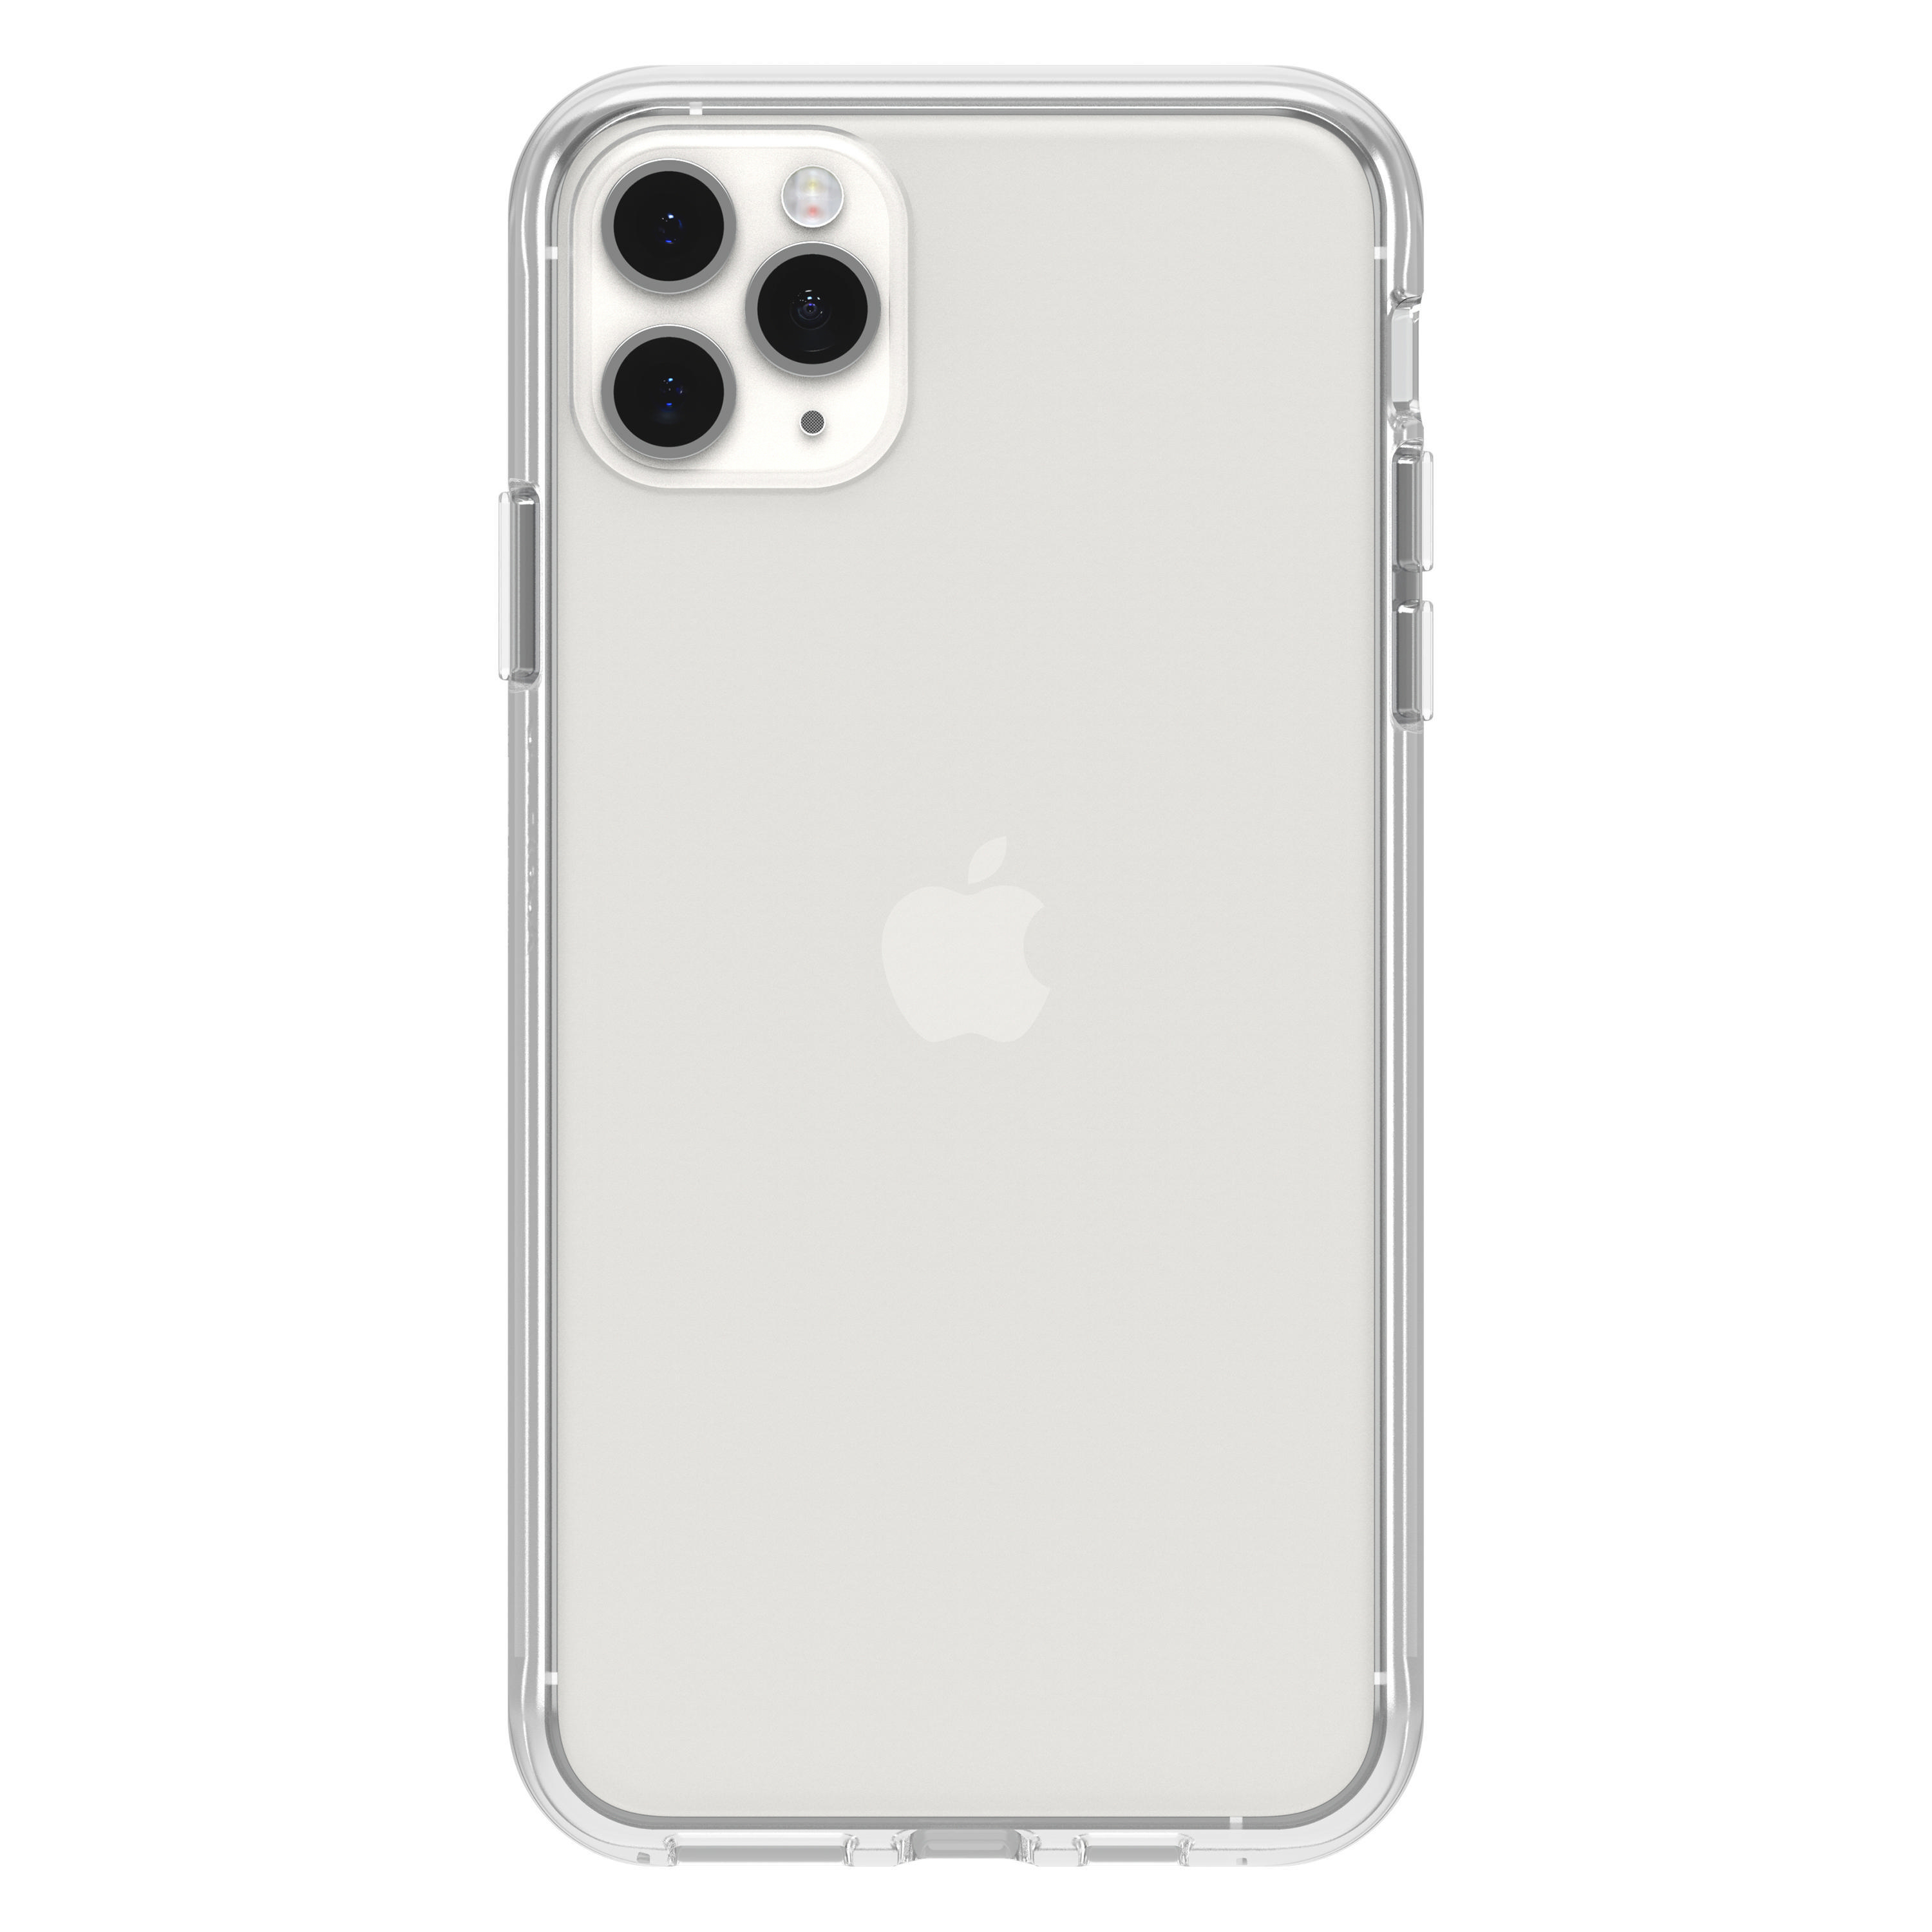 Transparent 11 Pro Backcover, Apple, iPhone Max, React, OTTERBOX